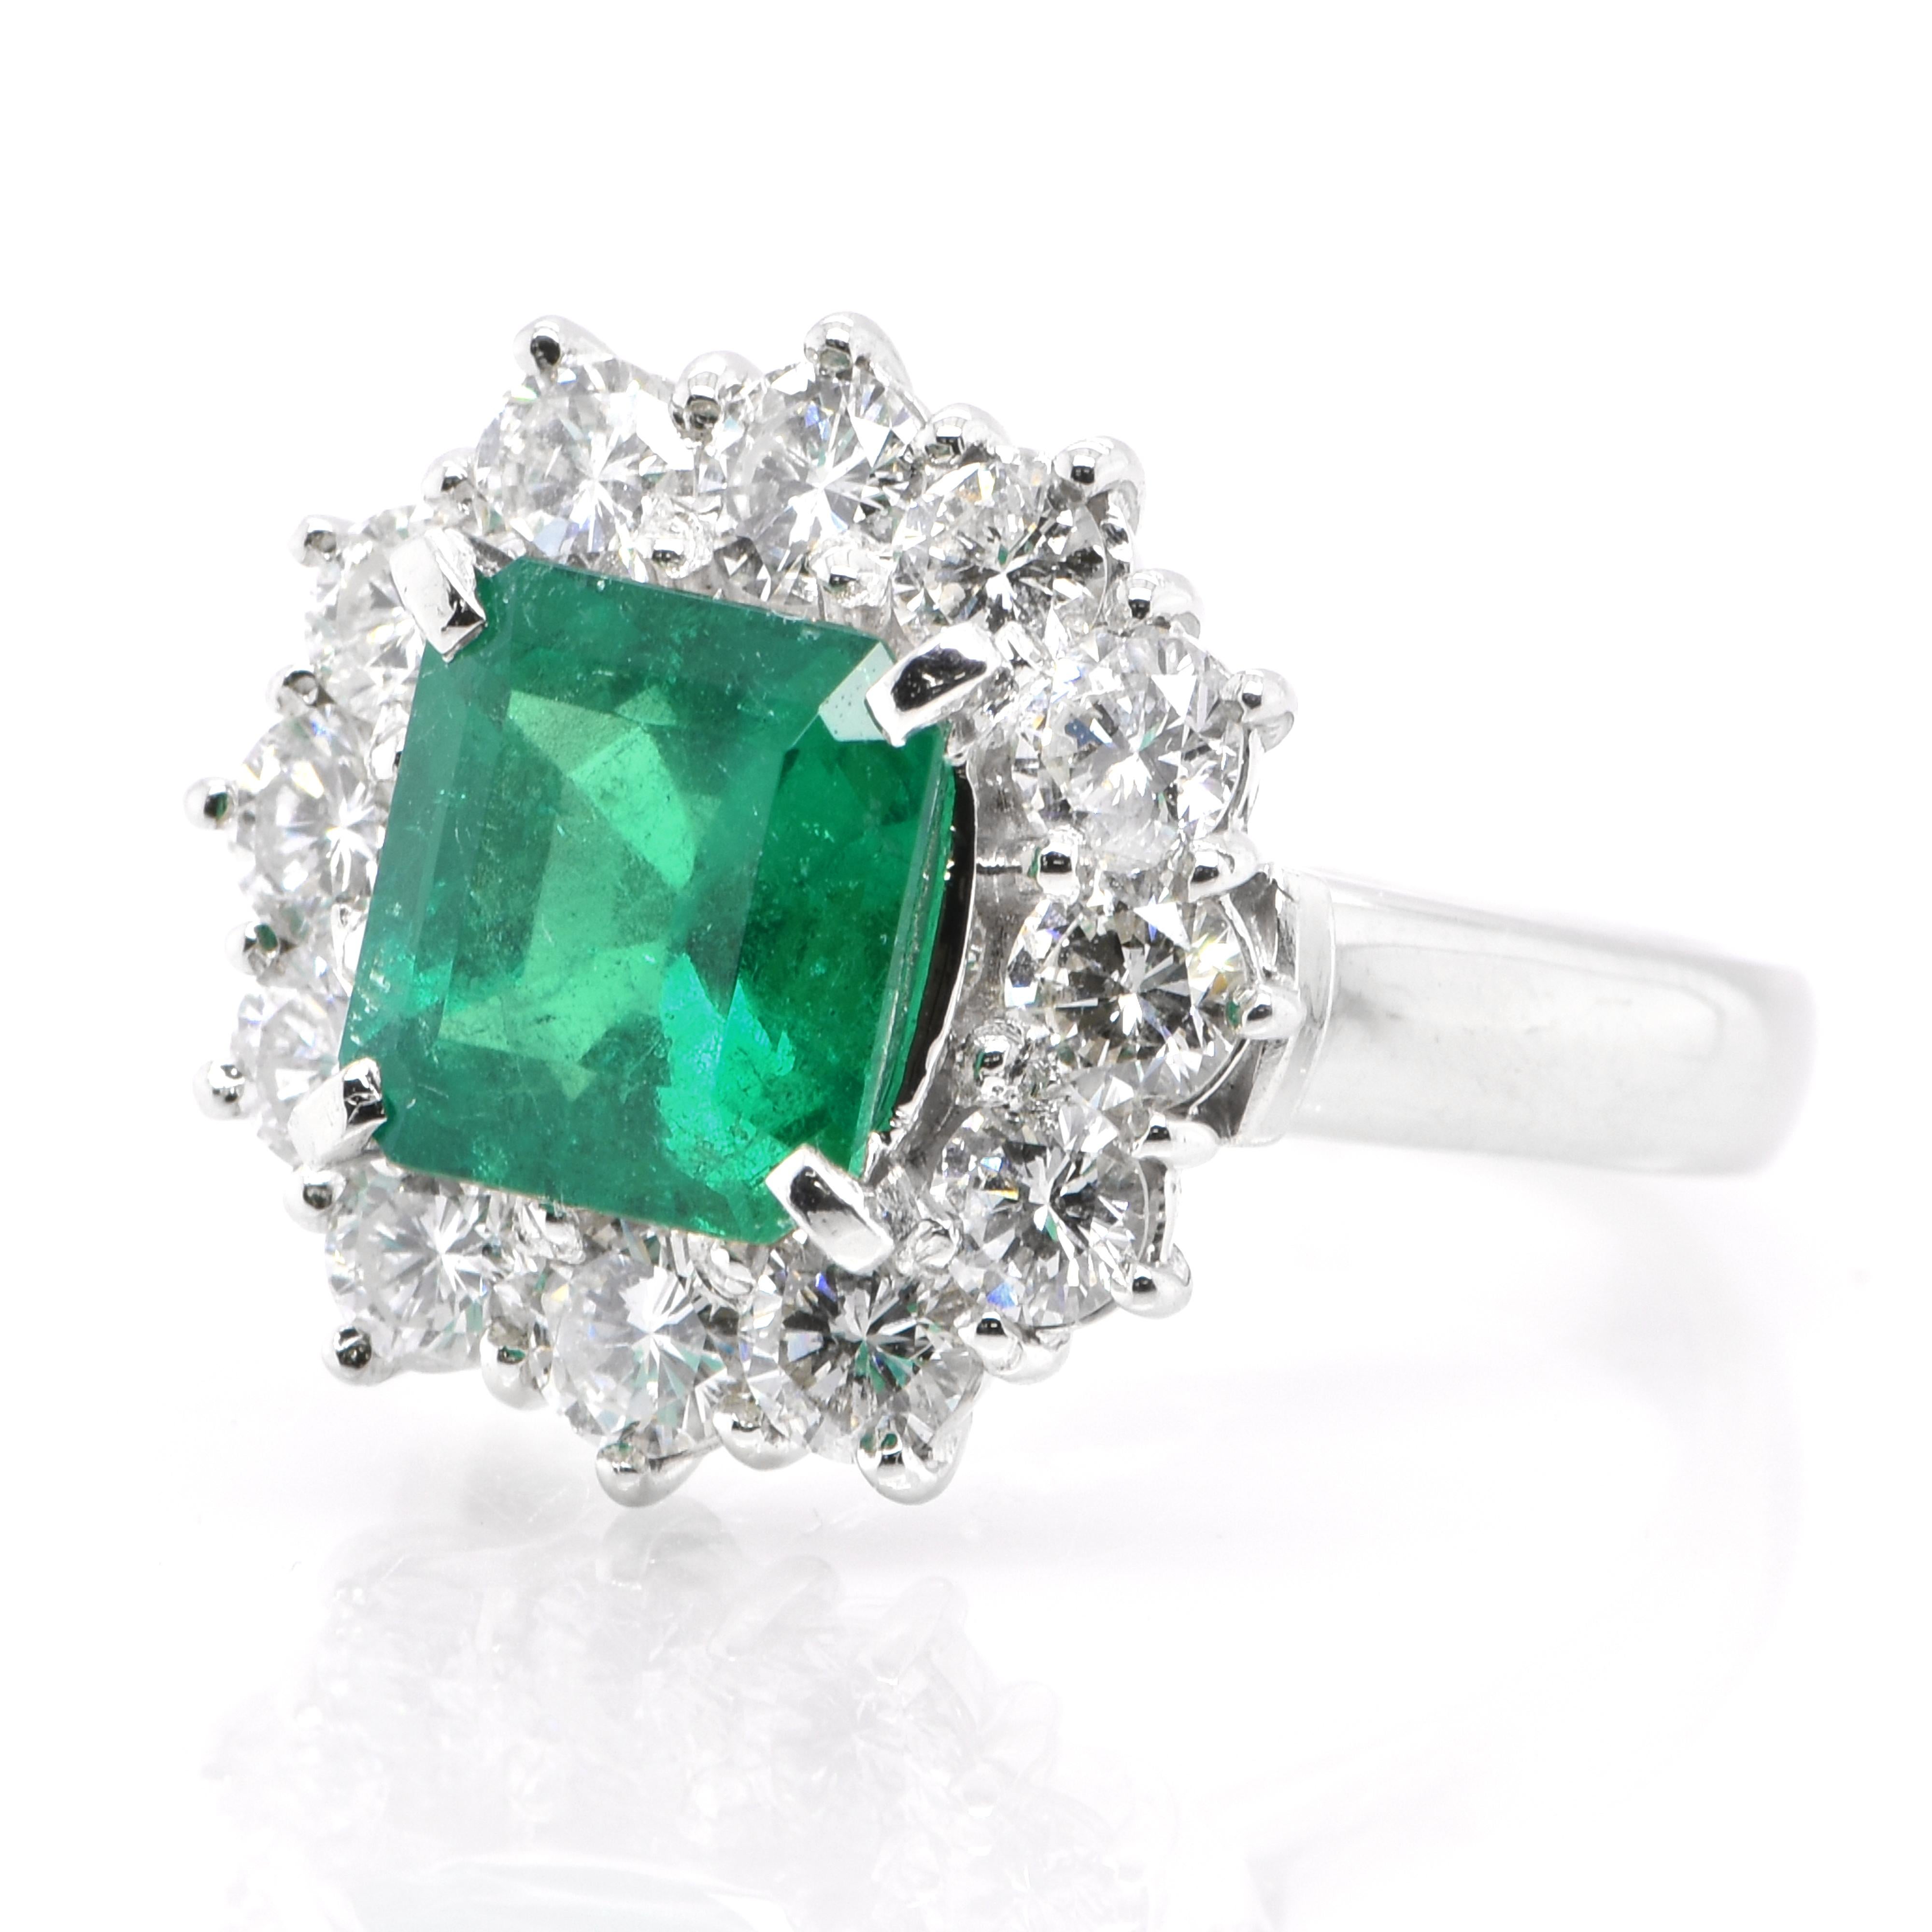 A stunning Halo ring featuring a GIA Certified 2.21 Carat Natural Colombian Emerald and 1.48 Carats of Diamond Accents set in Platinum. People have admired emerald’s green for thousands of years. Emeralds have always been associated with the lushest